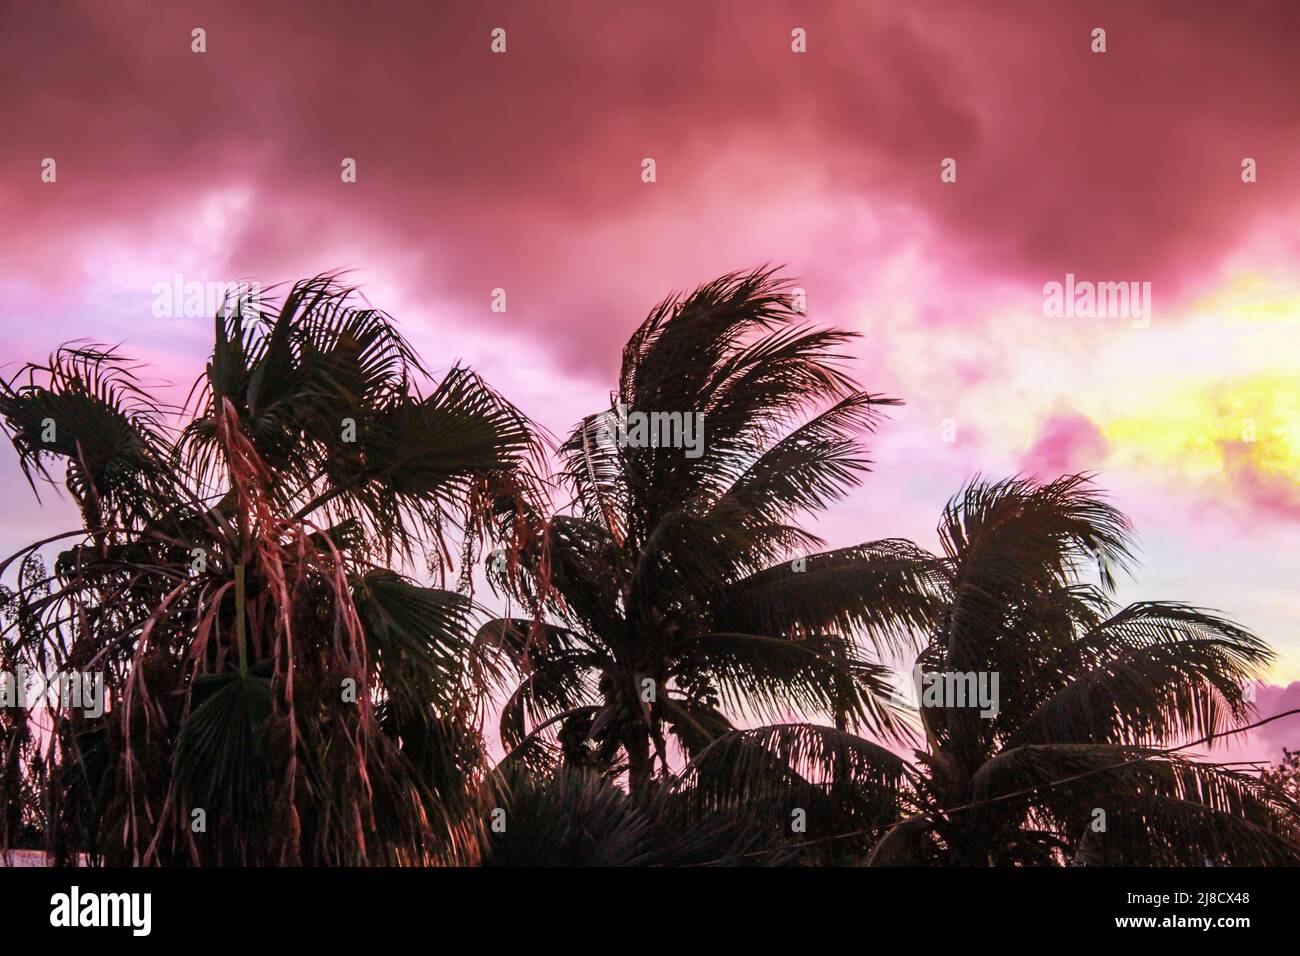 The edge of the storm - Palm trees silhouetted against a strange pink and turquoise and yellow sky as a tropical storm passes nearby Stock Photo